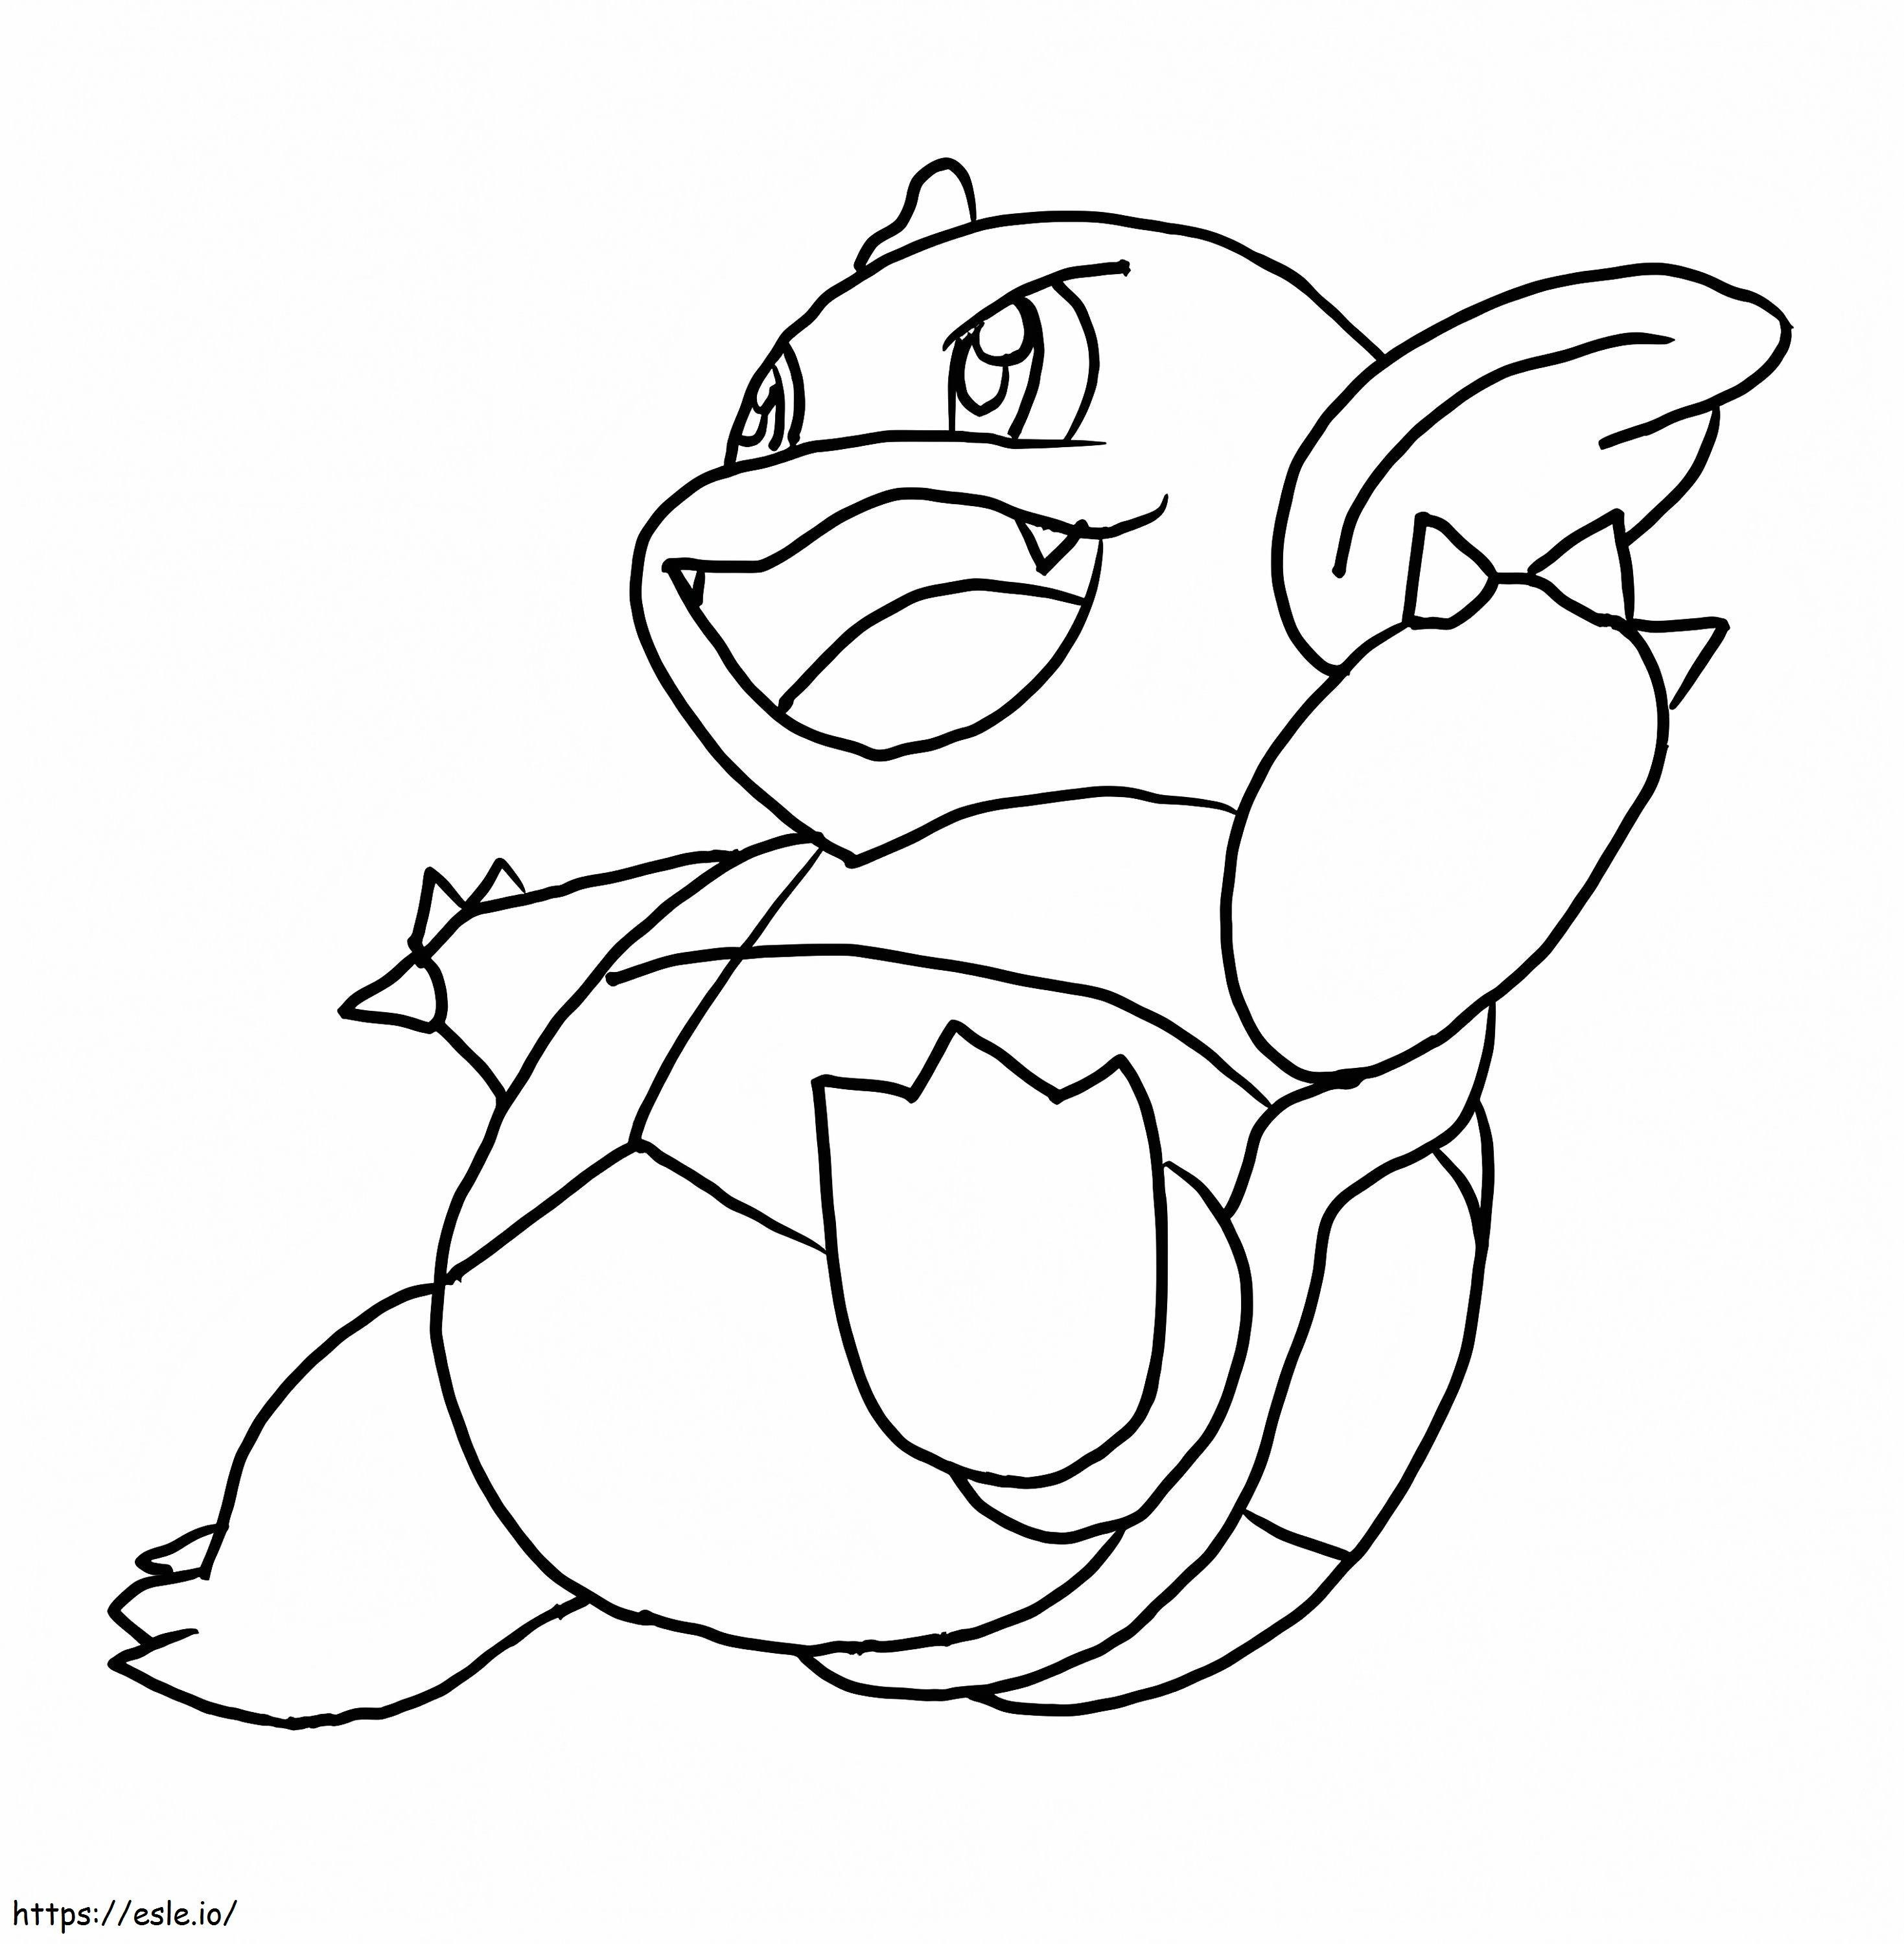 Wartortle 5 coloring page